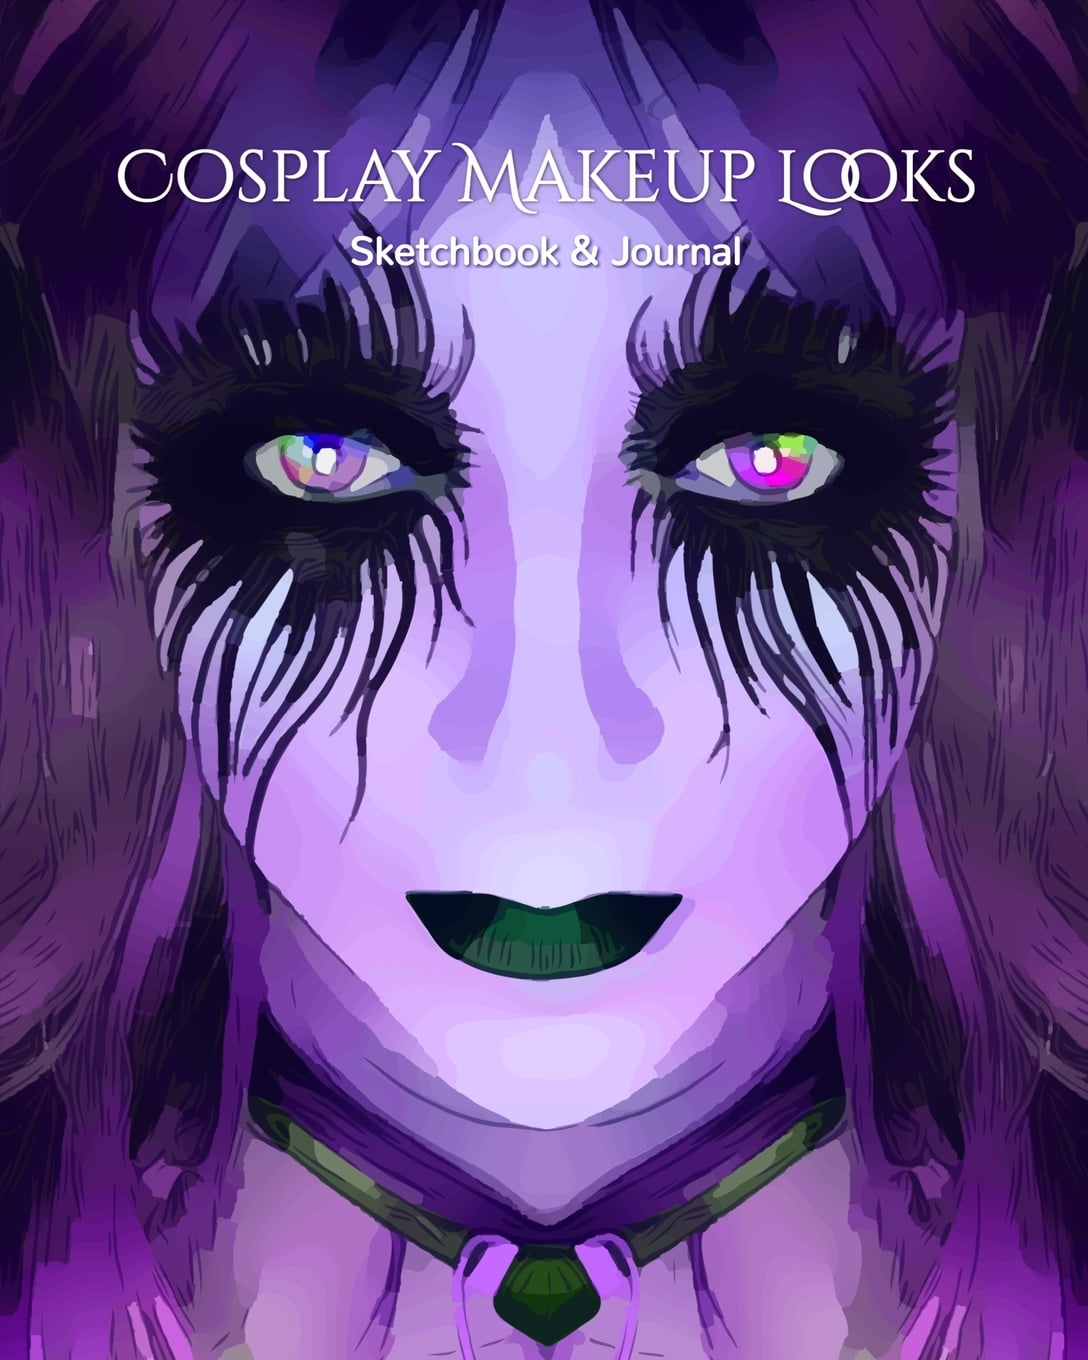 My Cosplay Makeup Charts: Make Up Charts to Brainstorm Ideas and Practice Your Cosplay Make-Up Looks [Book]